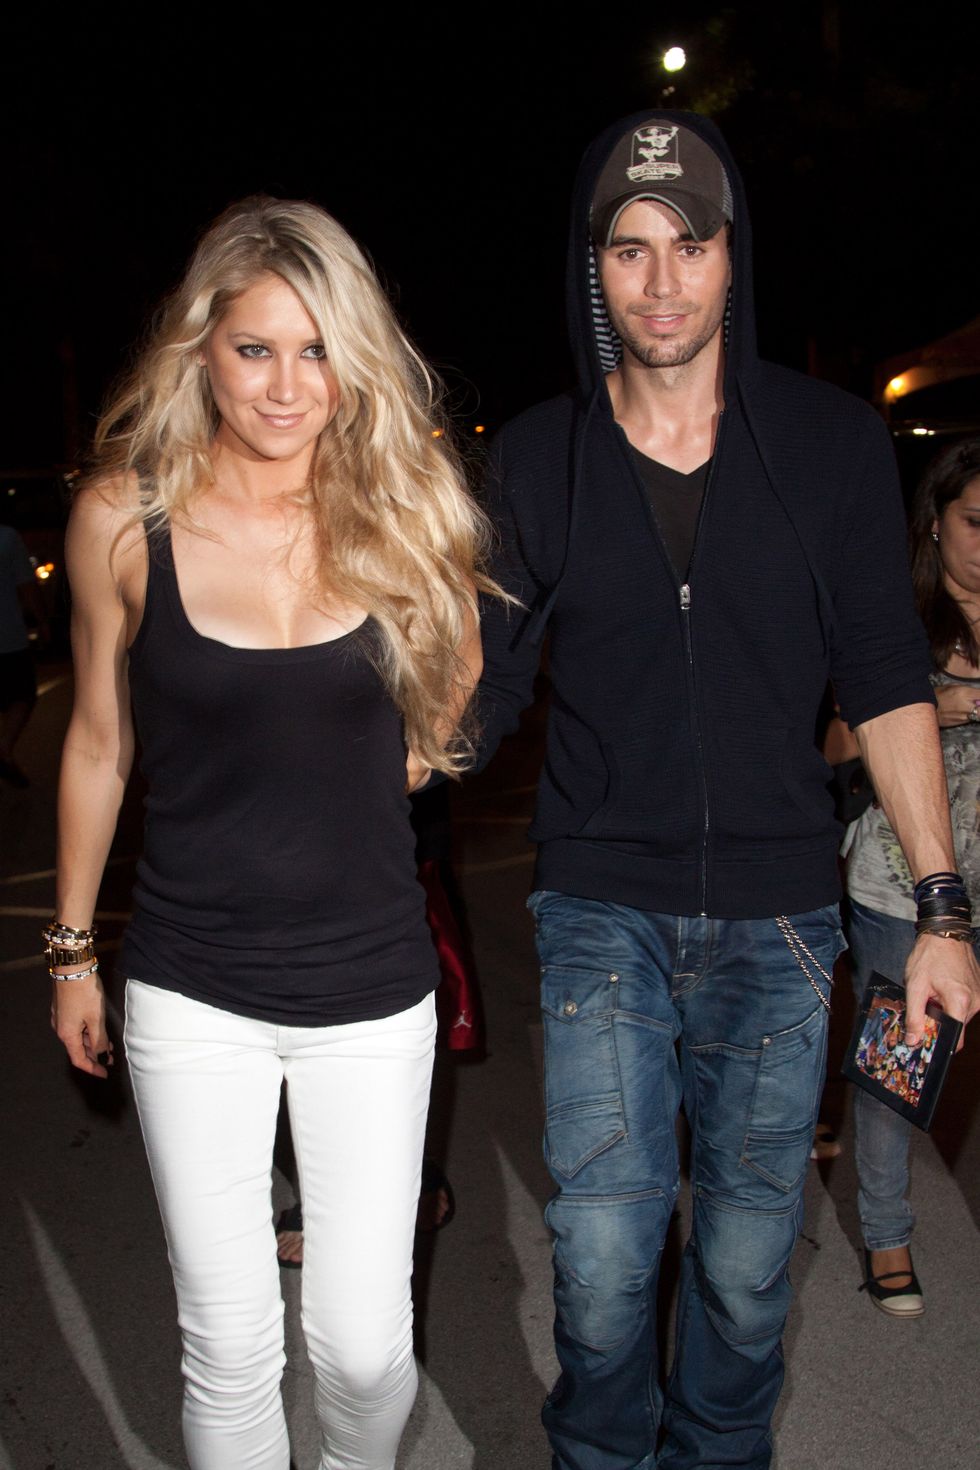 <p>The pair have been together for 15 years but are rarely photographed together publicly. Though the two have been the subject of wedding rumors for years, back in 2014, the singer <a href="http://www.eonline.com/news/520819/enrique-iglesias-has-no-intention-of-marrying-anna-kournikova-it-won-t-make-us-happier" target="_blank" data-tracking-id="recirc-text-link">dismissed the idea of marriage</a>: "[W]hen you've been with someone for such a long time, I don't think it's going to make – bring us closer together. I don't think it's going to...make us any happier."<span class="redactor-invisible-space" data-verified="redactor" data-redactor-tag="span" data-redactor-class="redactor-invisible-space"></span></p>